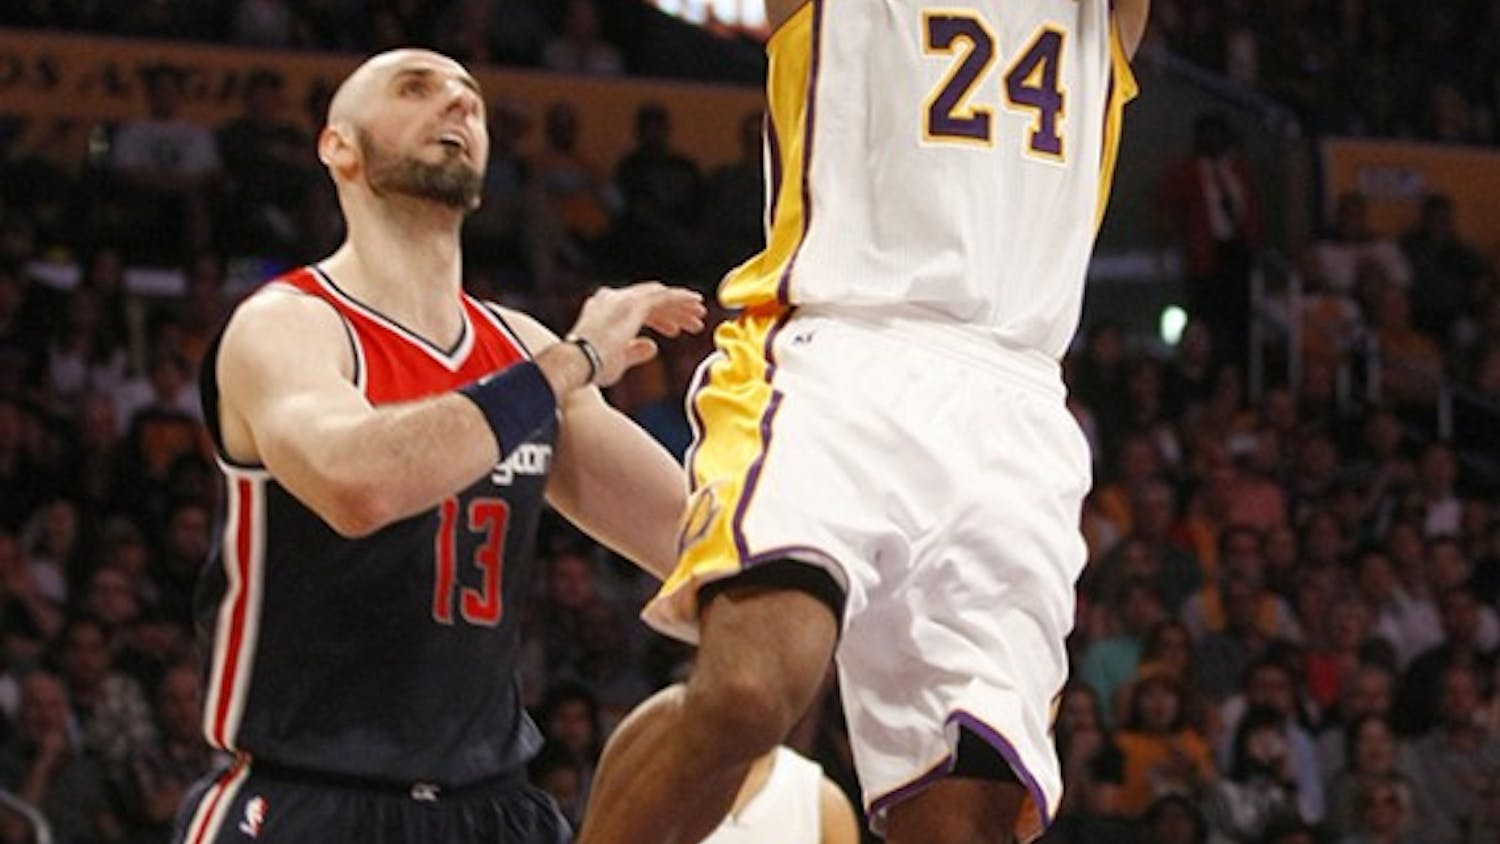 Los Angeles Lakers&apos; Kobe Bryant goes up for two against Washington Wizards&apos; Marcin Gortat on Sunday, March 27, 2016, at the Staples Center in Los Angeles. (Genaro Molina/Los Angeles Times/TNS)